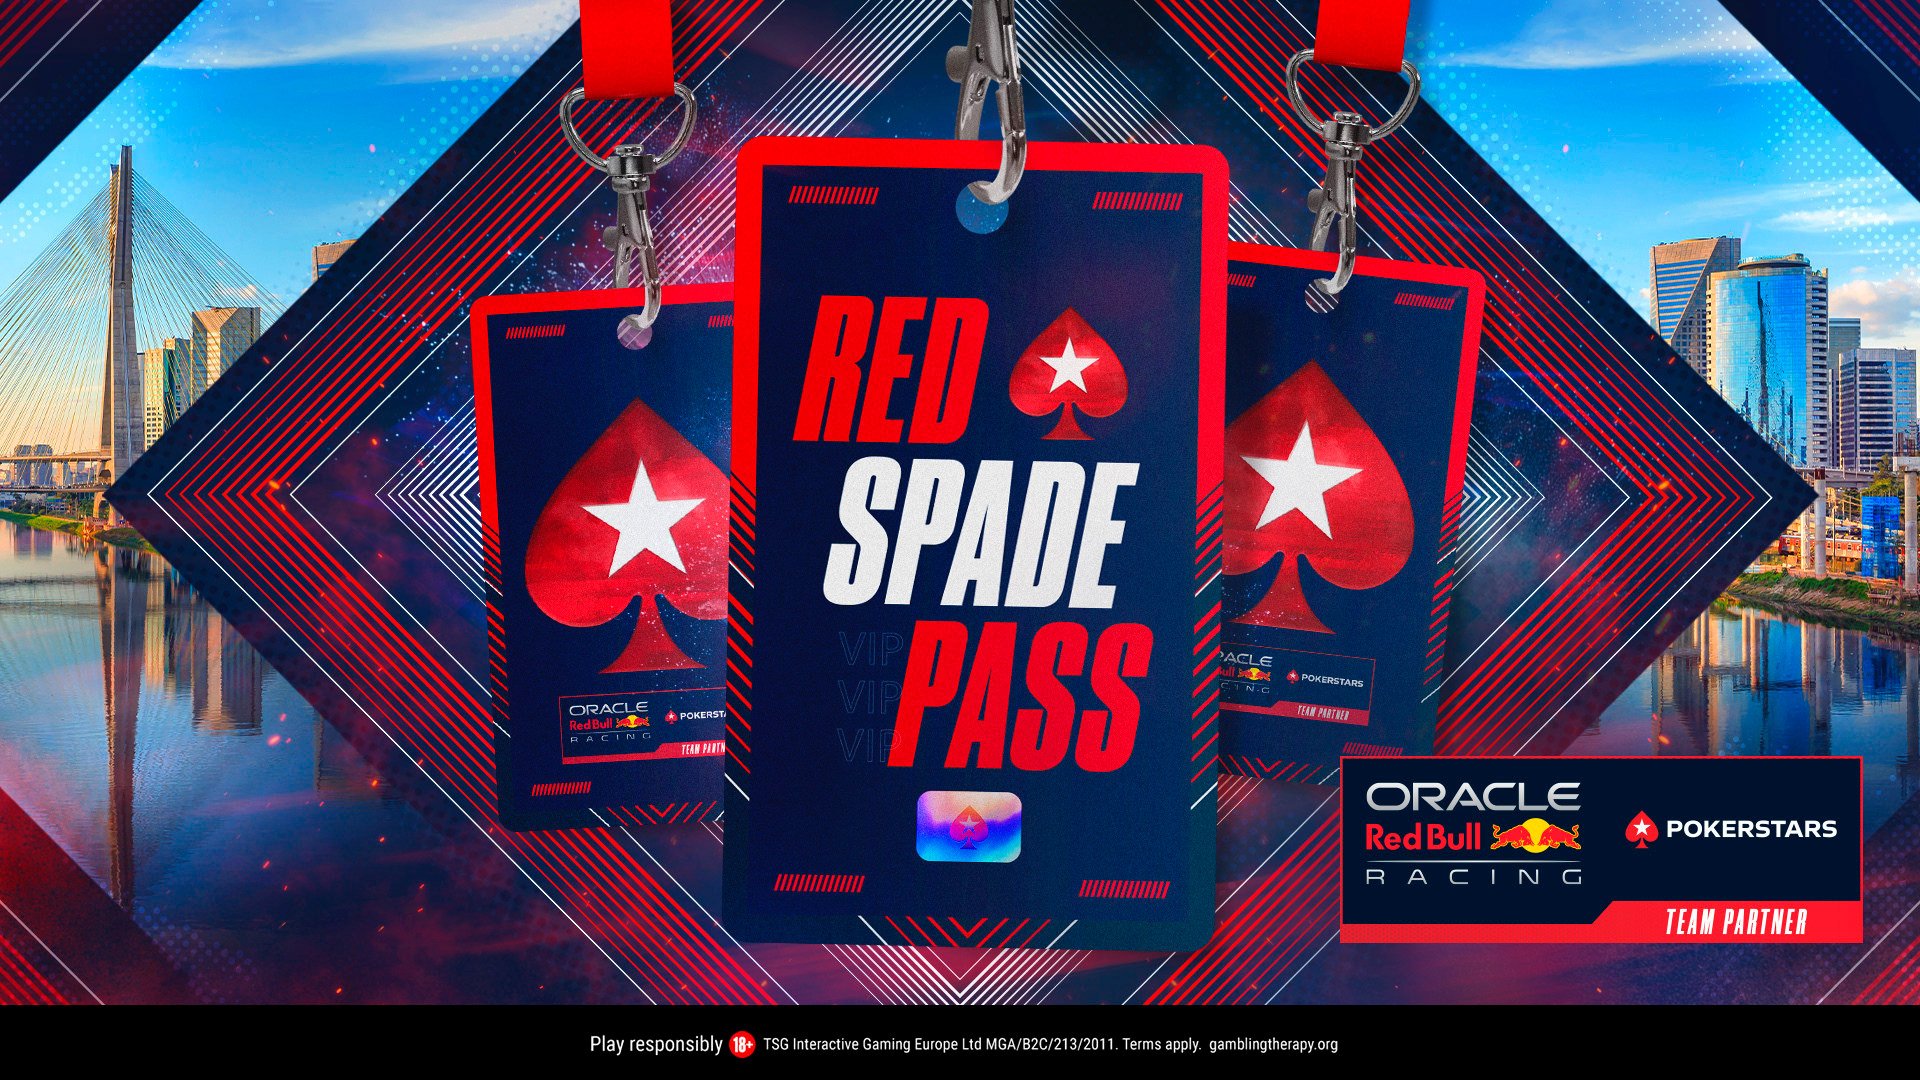 PokerStars launches new promotion rewarding players with a fan experience at F1’s Brazil Grand Prix